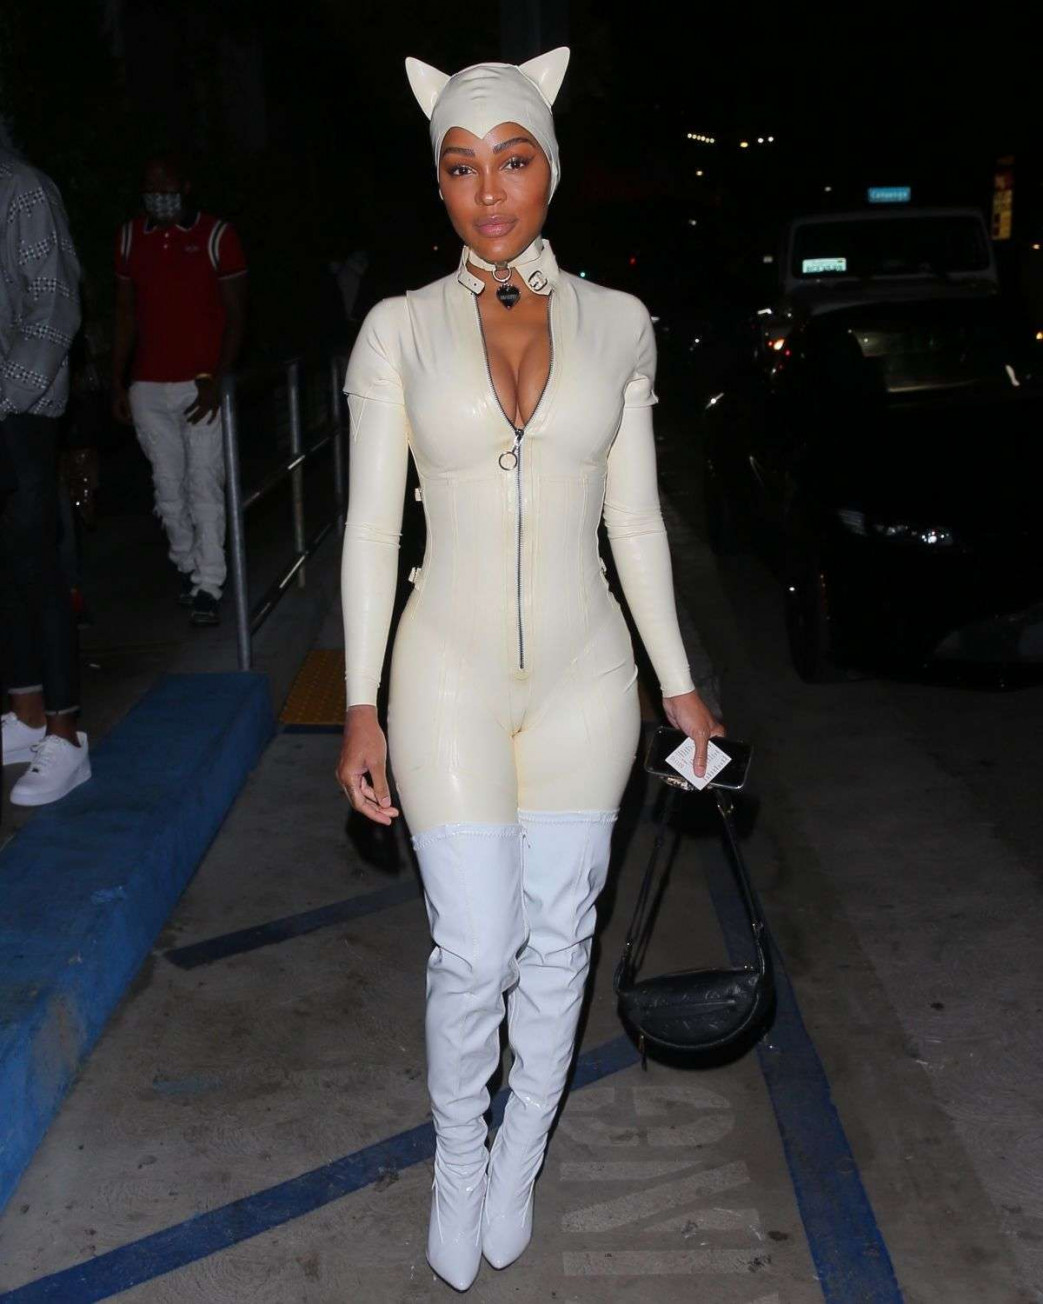 Meagan-Good-Busty-In-White-Catsuit-For-Halloween-2020-4.jpg